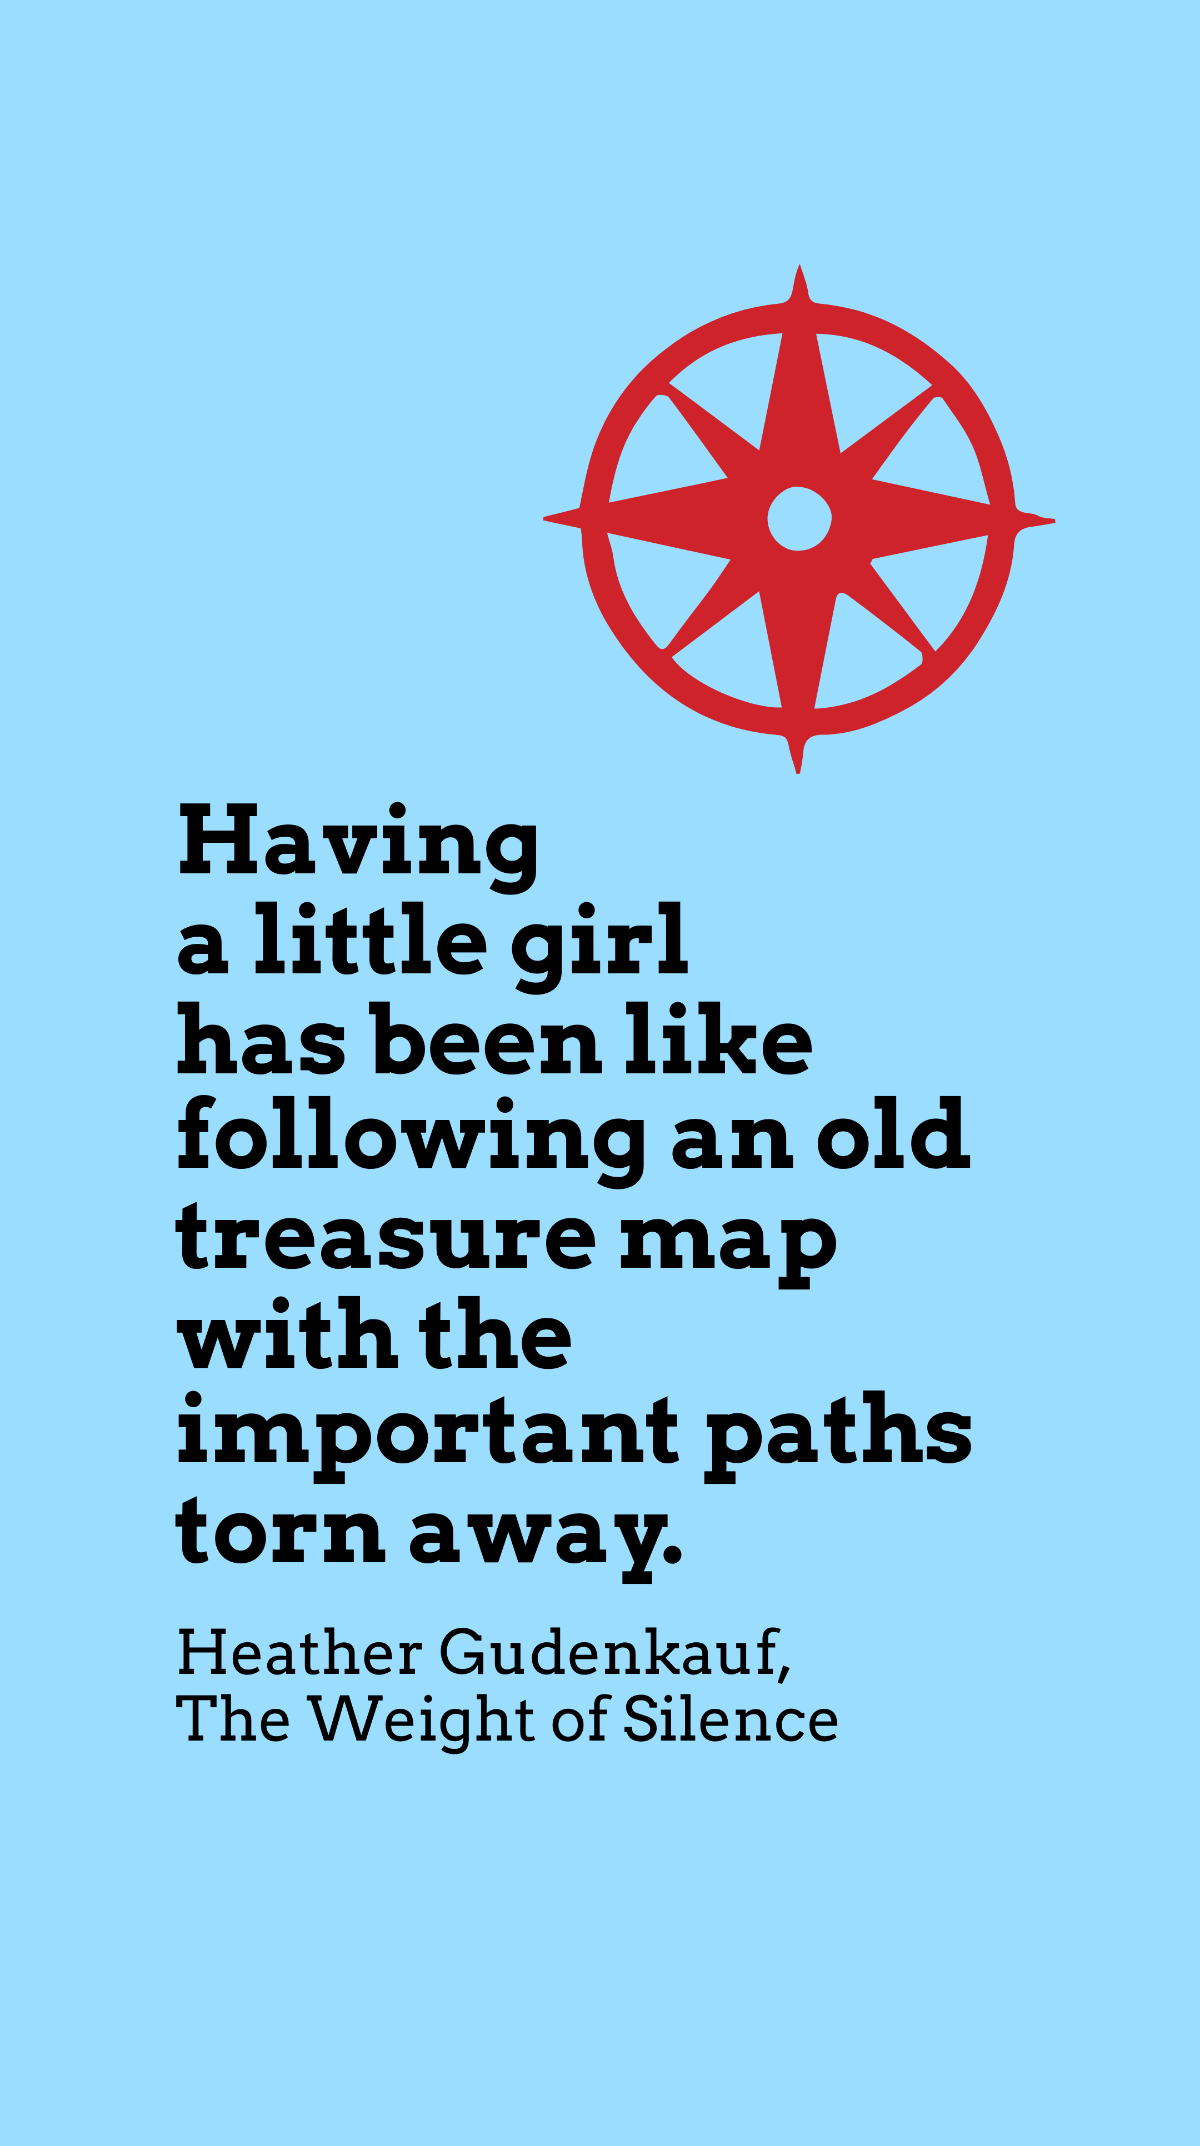 Heather Gudenkauf, The Weight of Silence - Having a little girl has been like following an old treasure map with the important paths torn away. Template